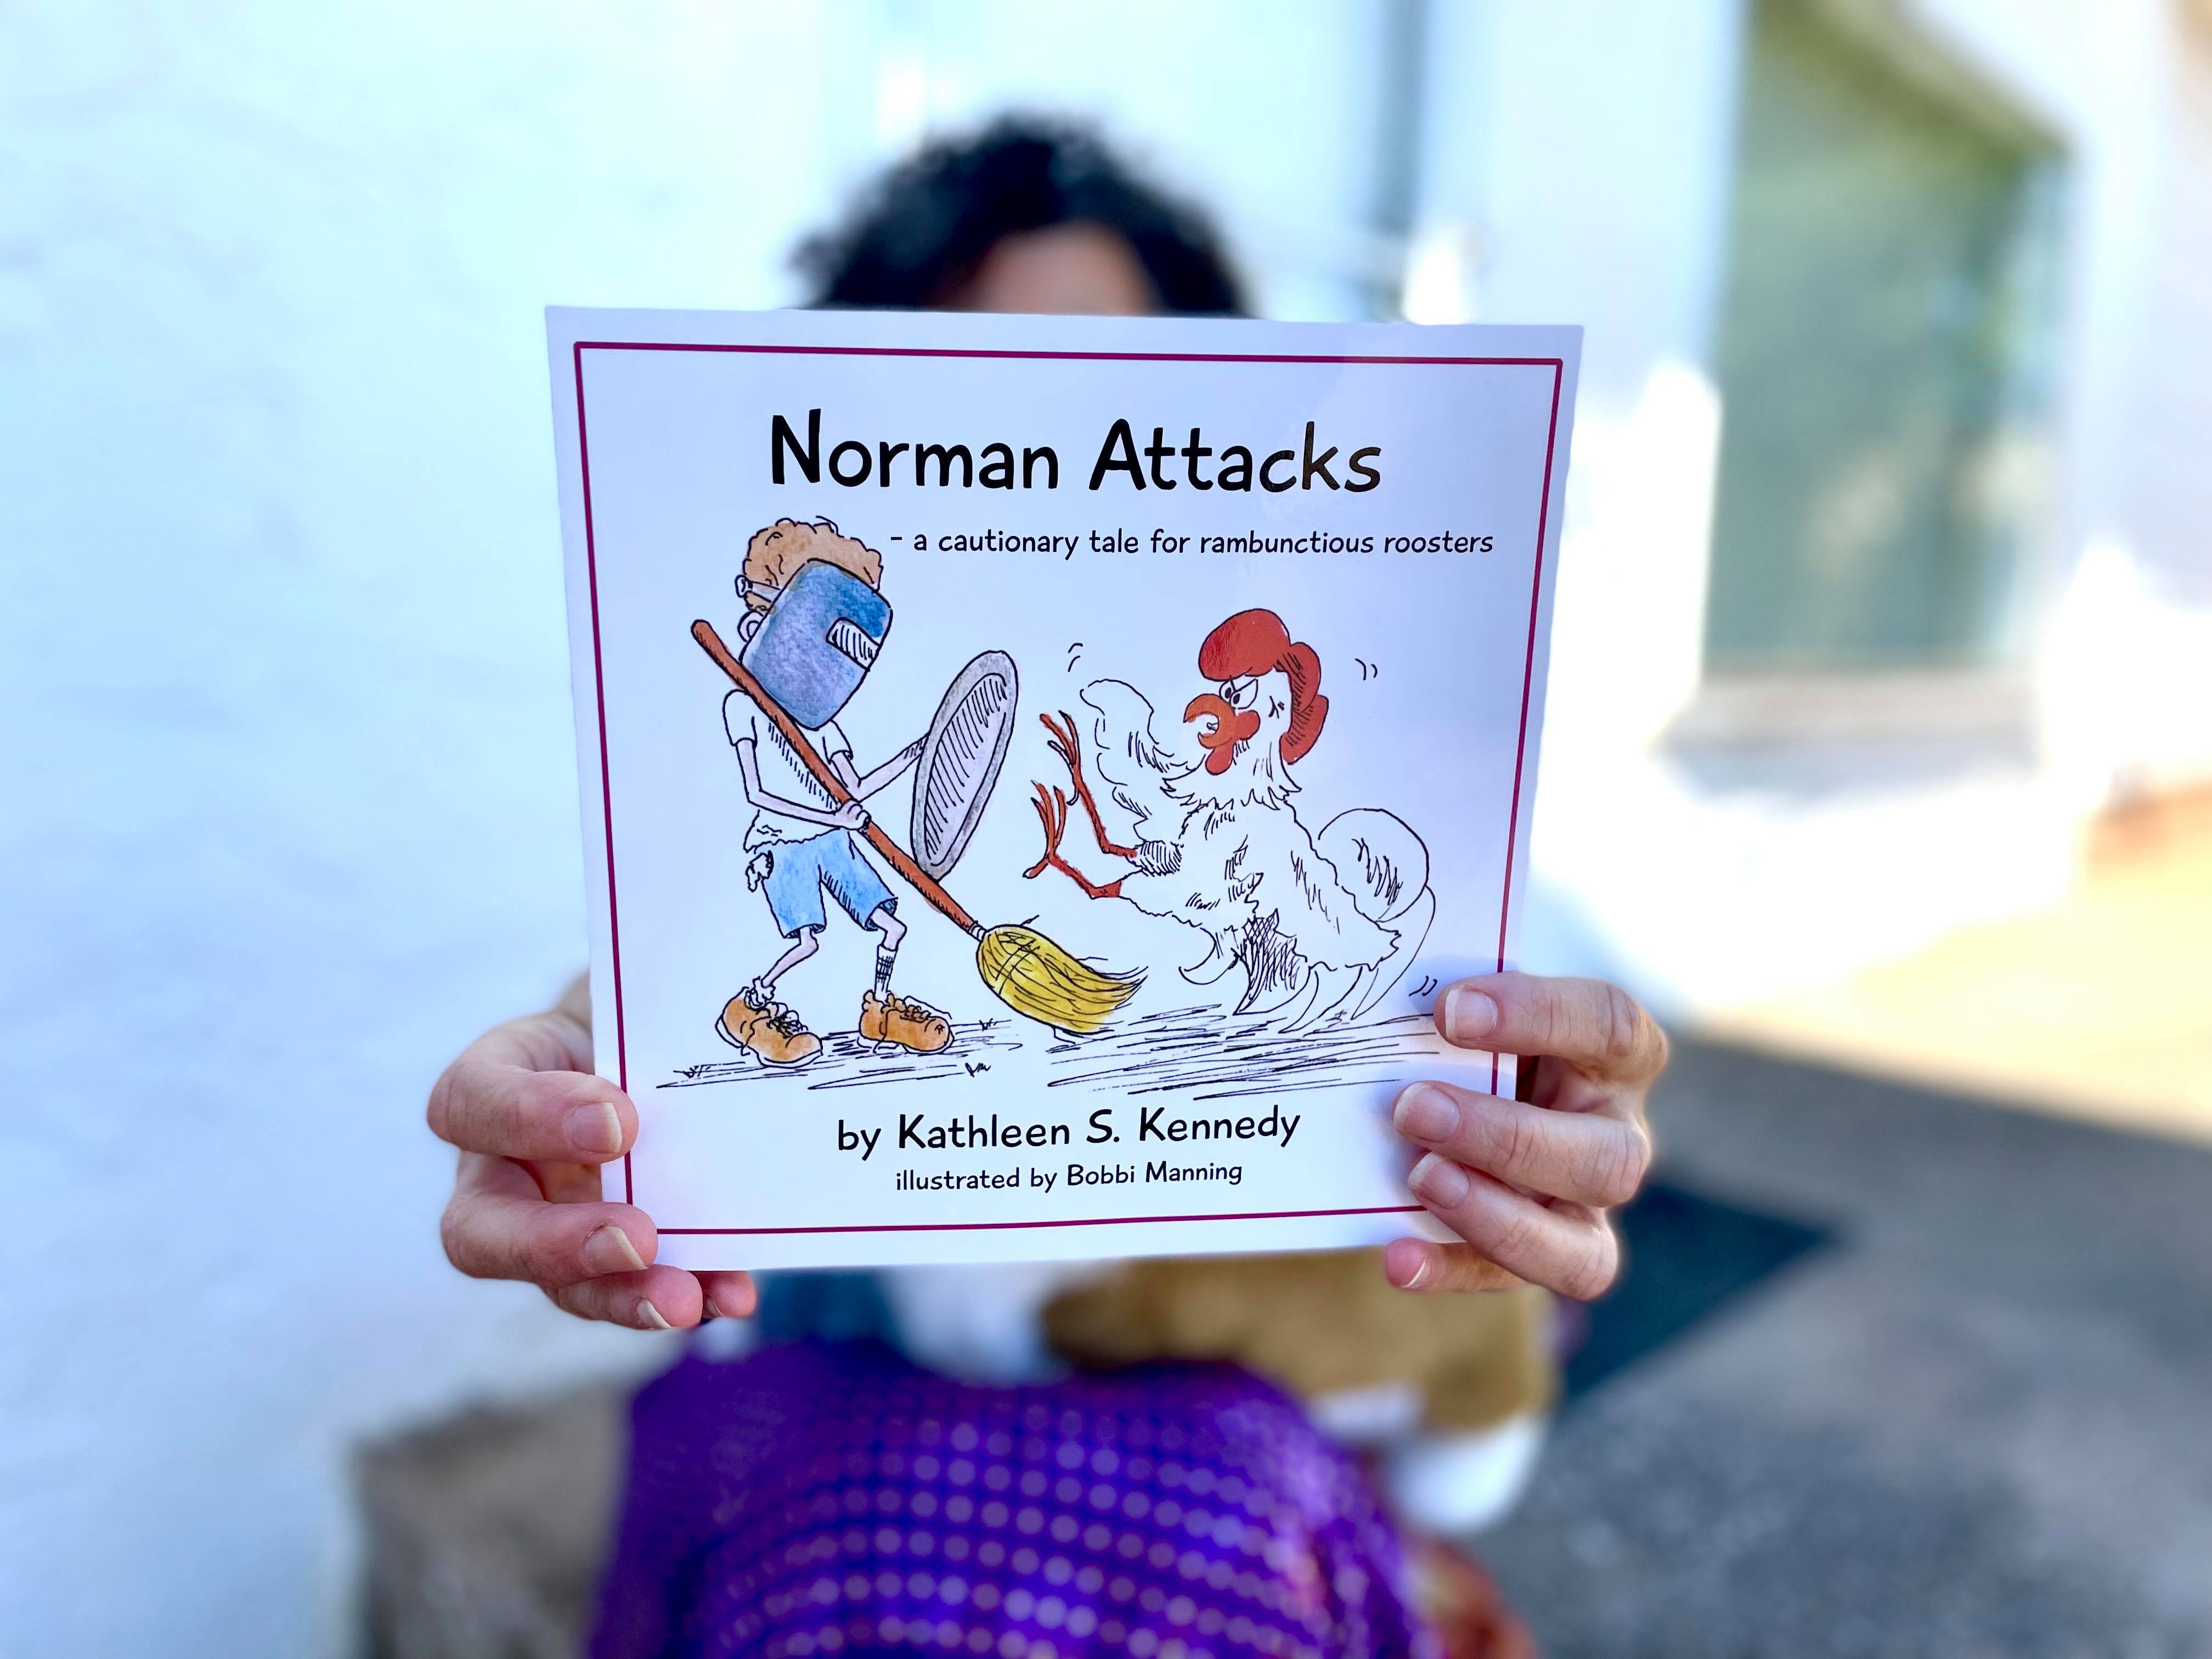 Norman Attacks: A Children’s Book About Bullying & Courage